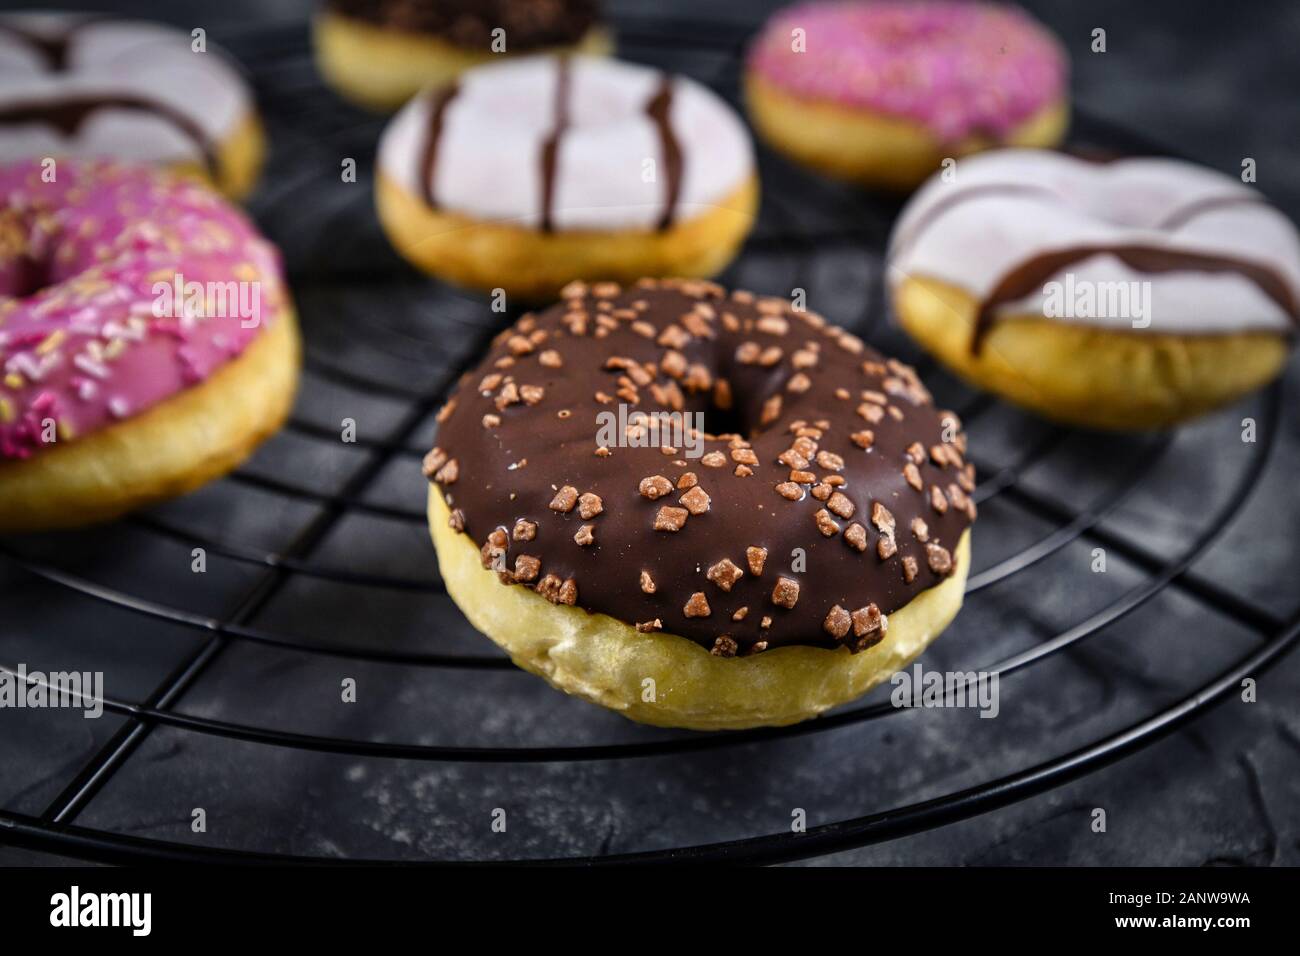 Tasty baked donut with brown chocolate glazing and sprinkles on cake grid  with other colorful donuts in background Stock Photo - Alamy